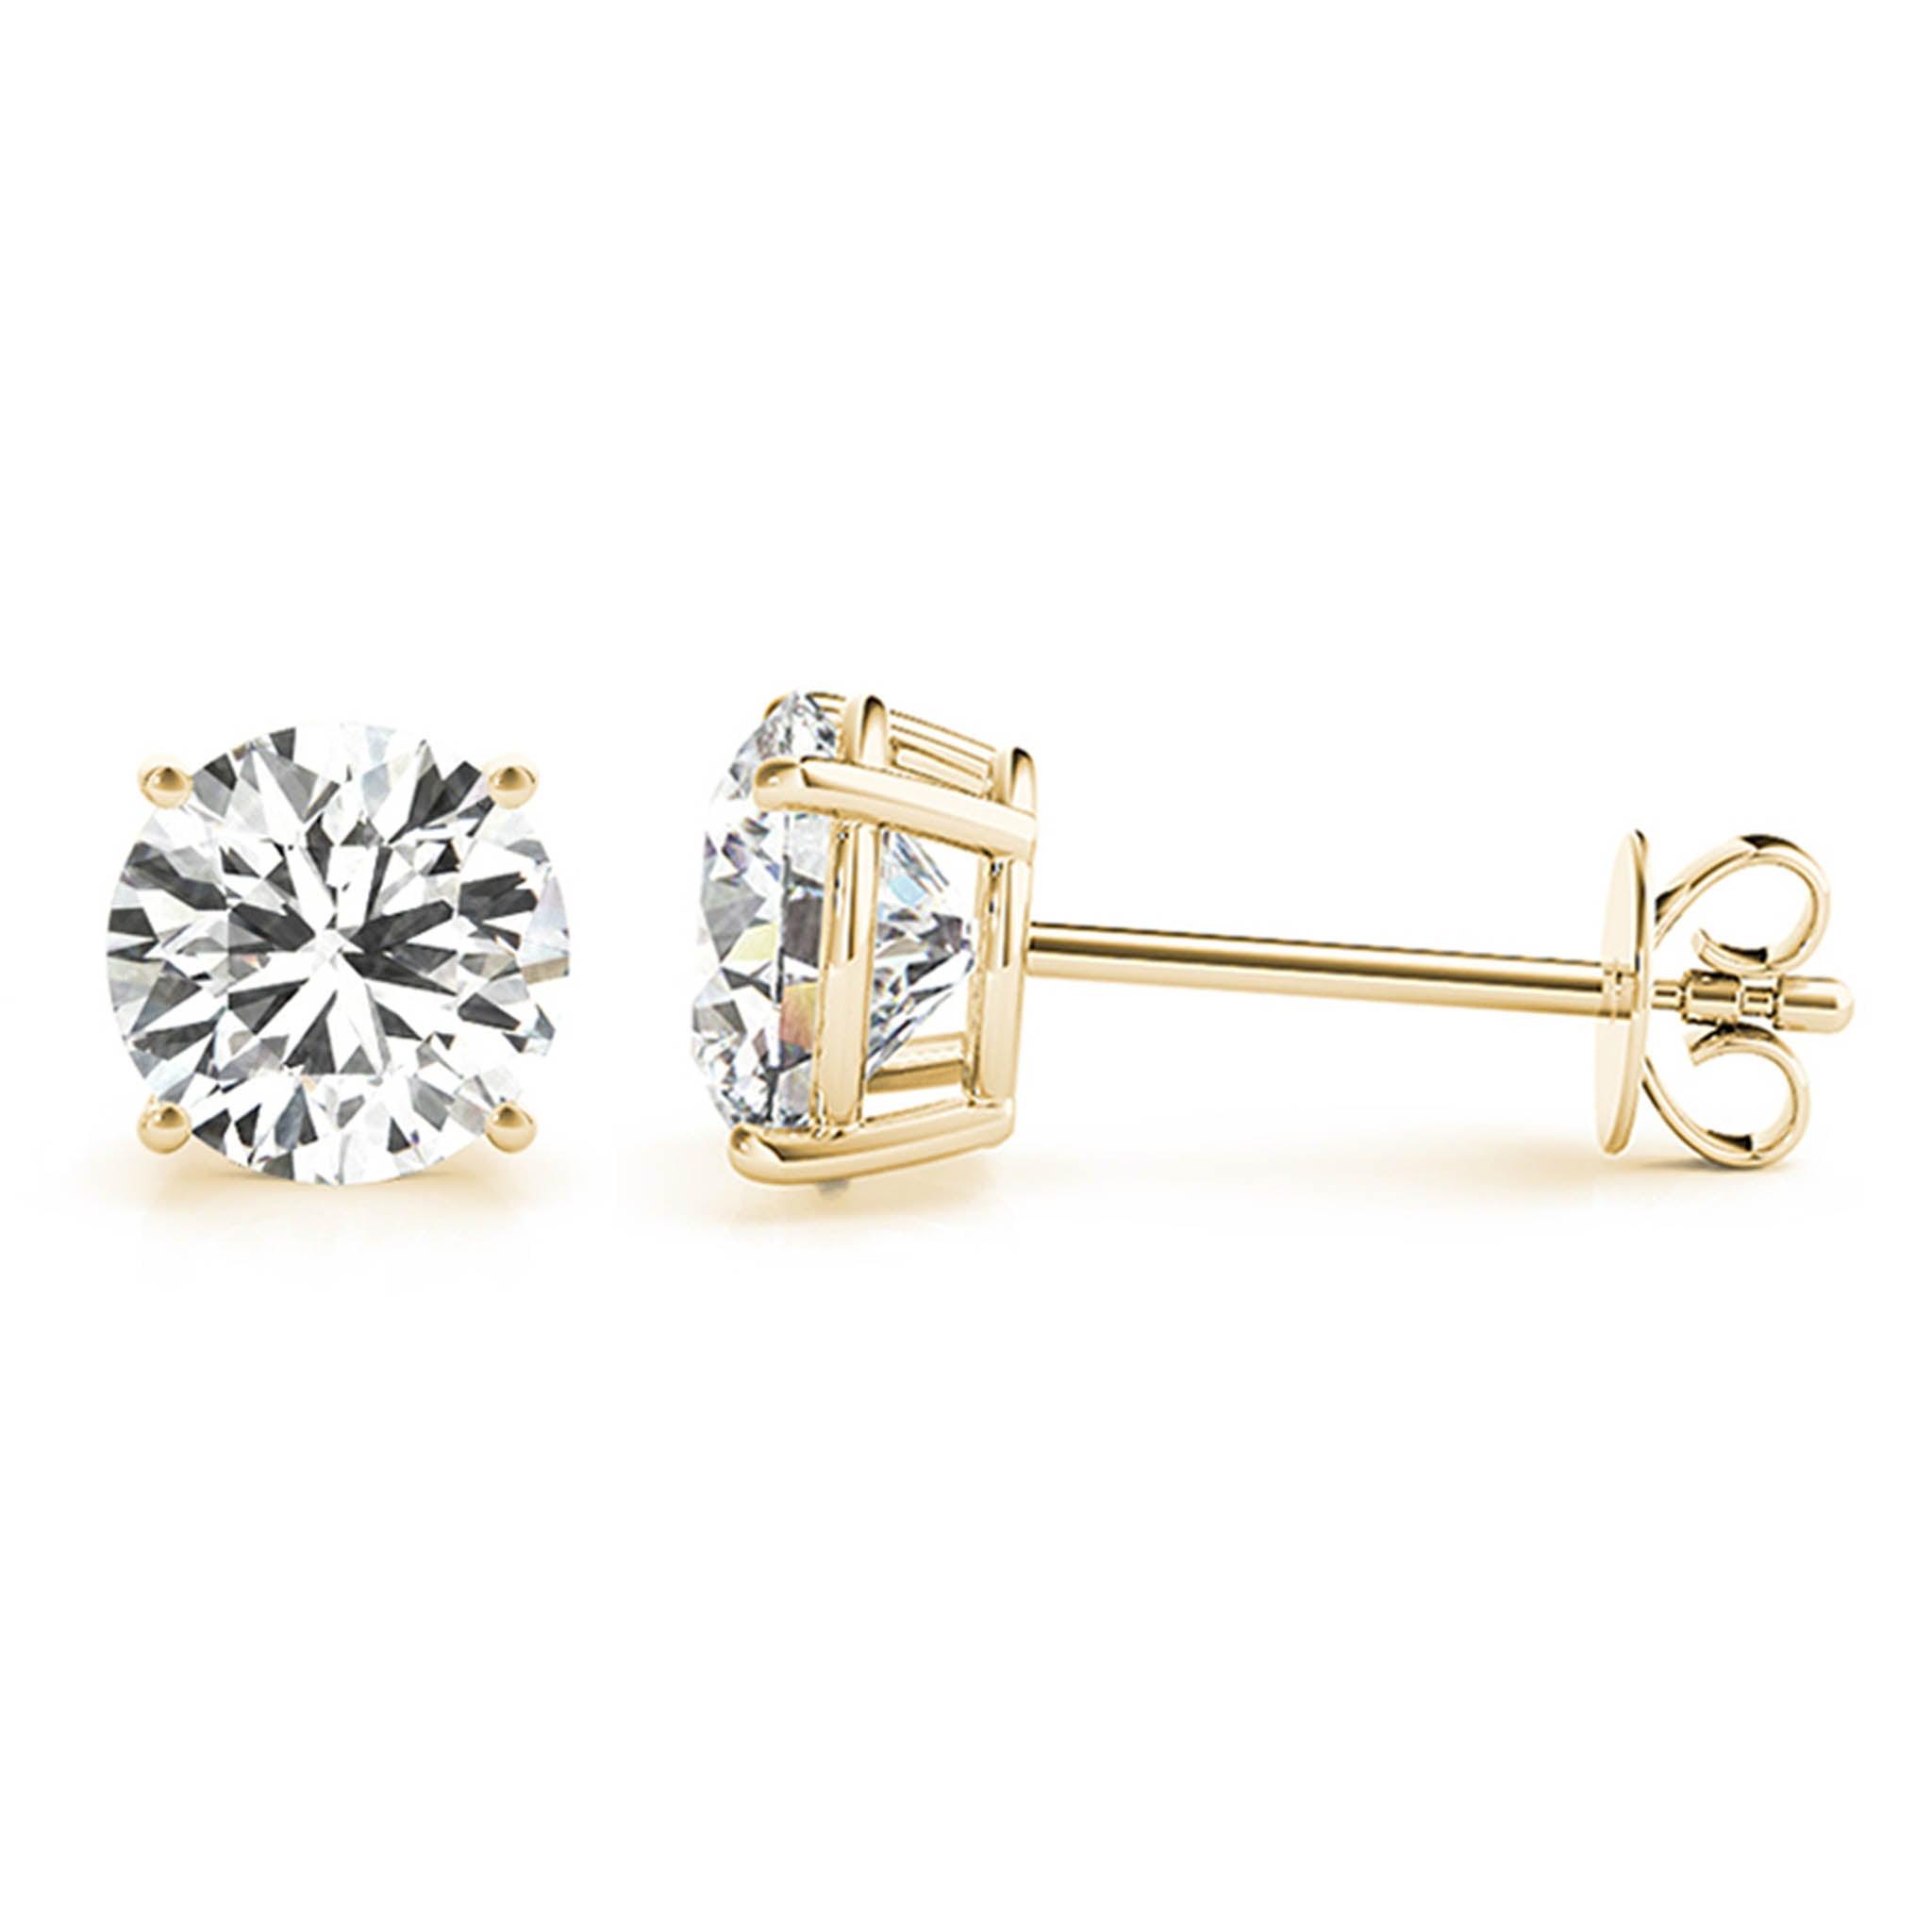 Gold Two Carat Lab Grown Diamond Ear Studs / Earrings.  Total diamond weight 2.00 carats.  4 claw setting. 14ct yellow gold version. 